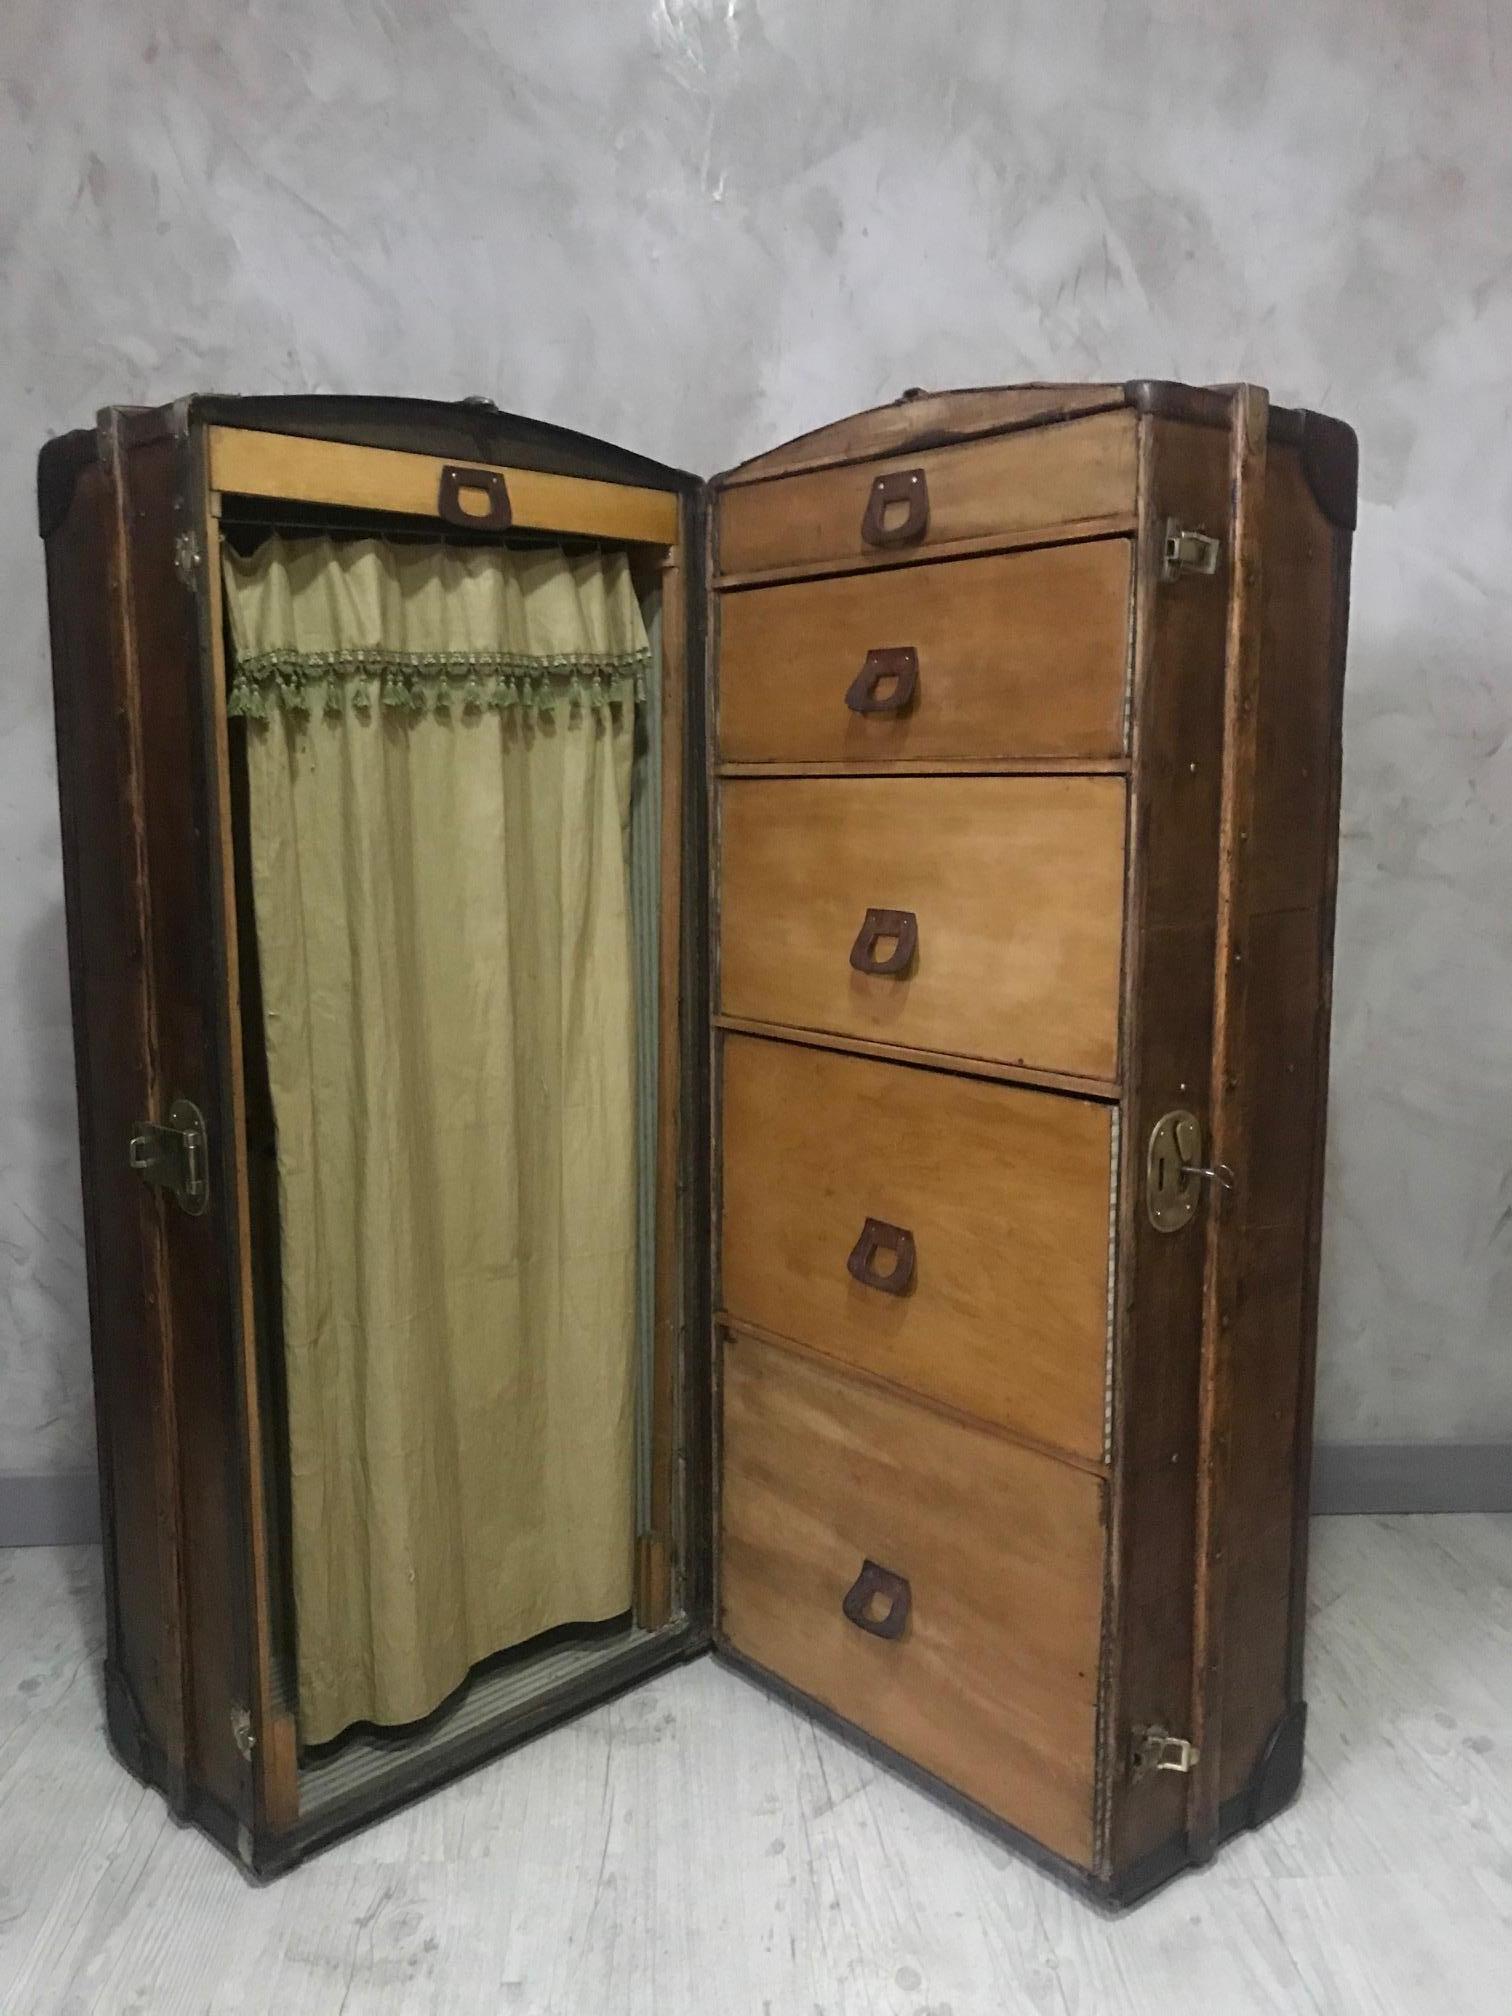 Beautiful and rare 20th century French wood and gilded brass cabin wardrobe or trunk from the 1920s.
Has been restored. When you open the trunk you find five upholstered drawers on the right and a wardrobe on the left closed by a silk fabric, the